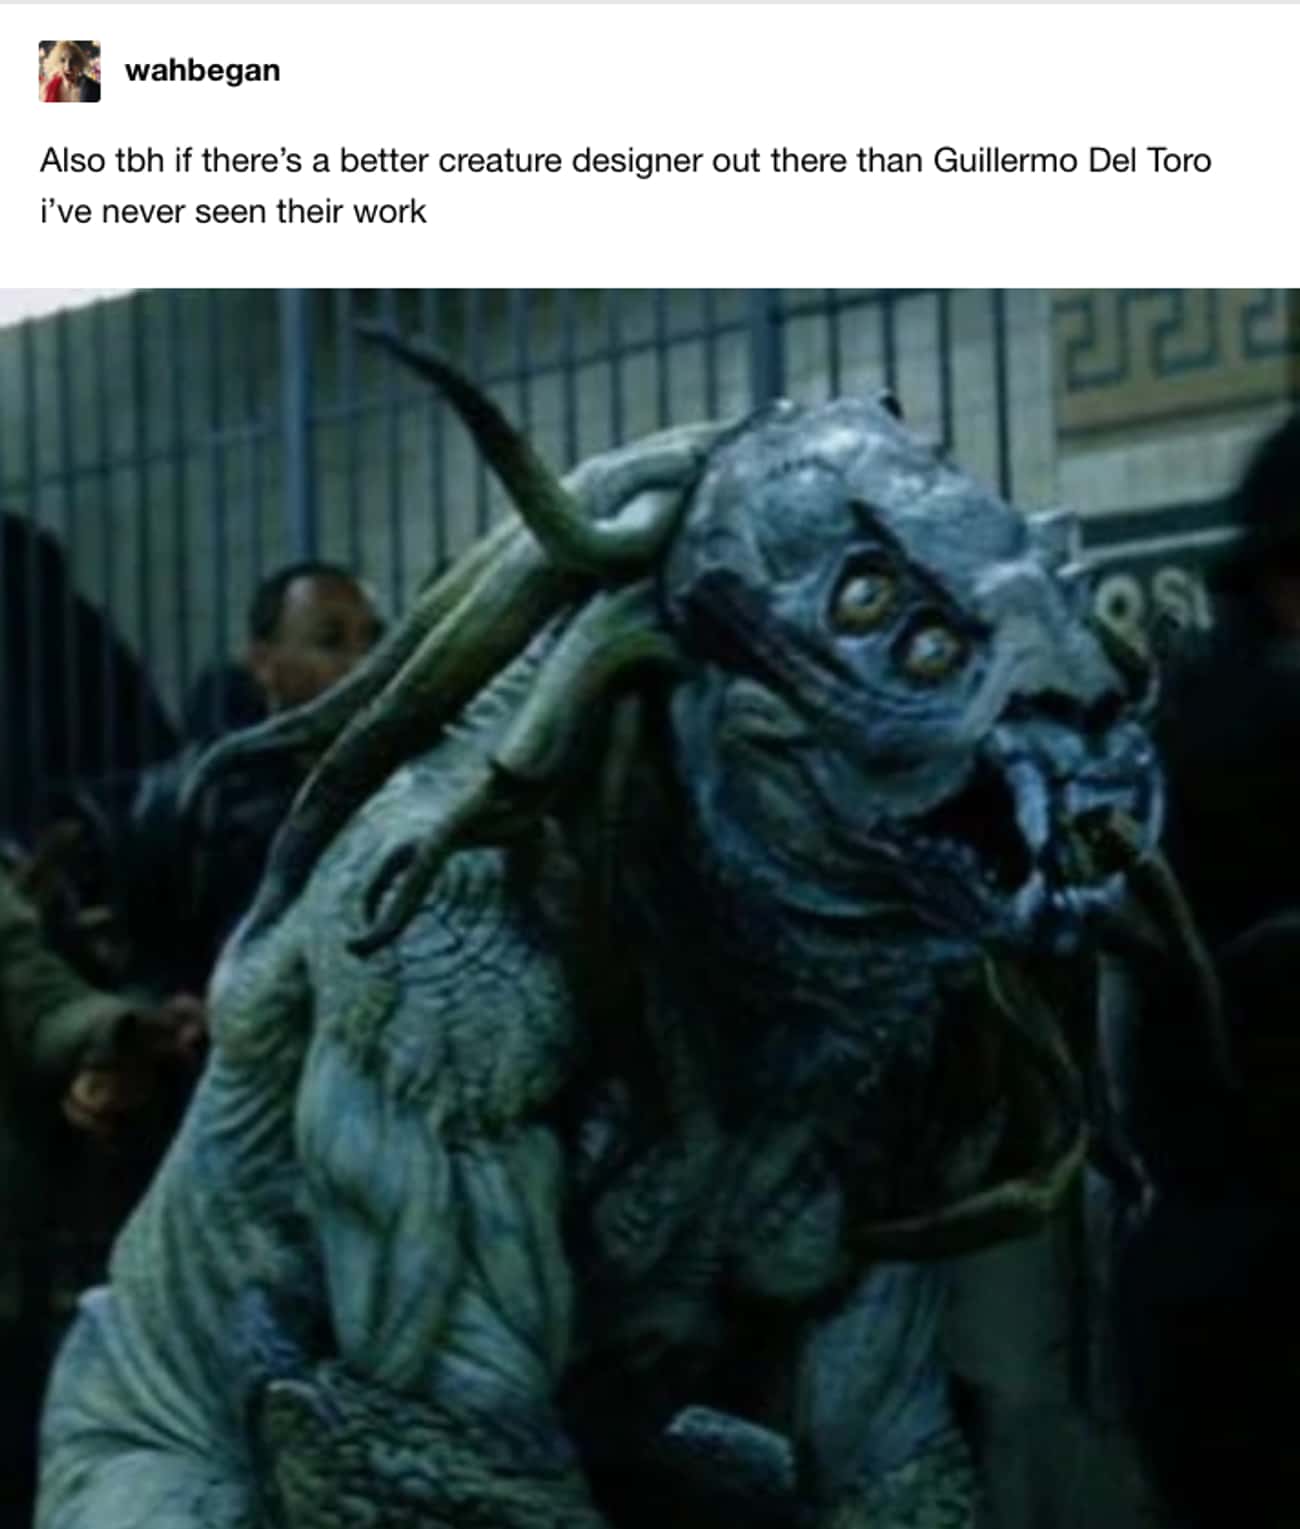 There Is No Better Creature Designer Than Guillermo Del Toro - Sammael From ‘Hellboy’